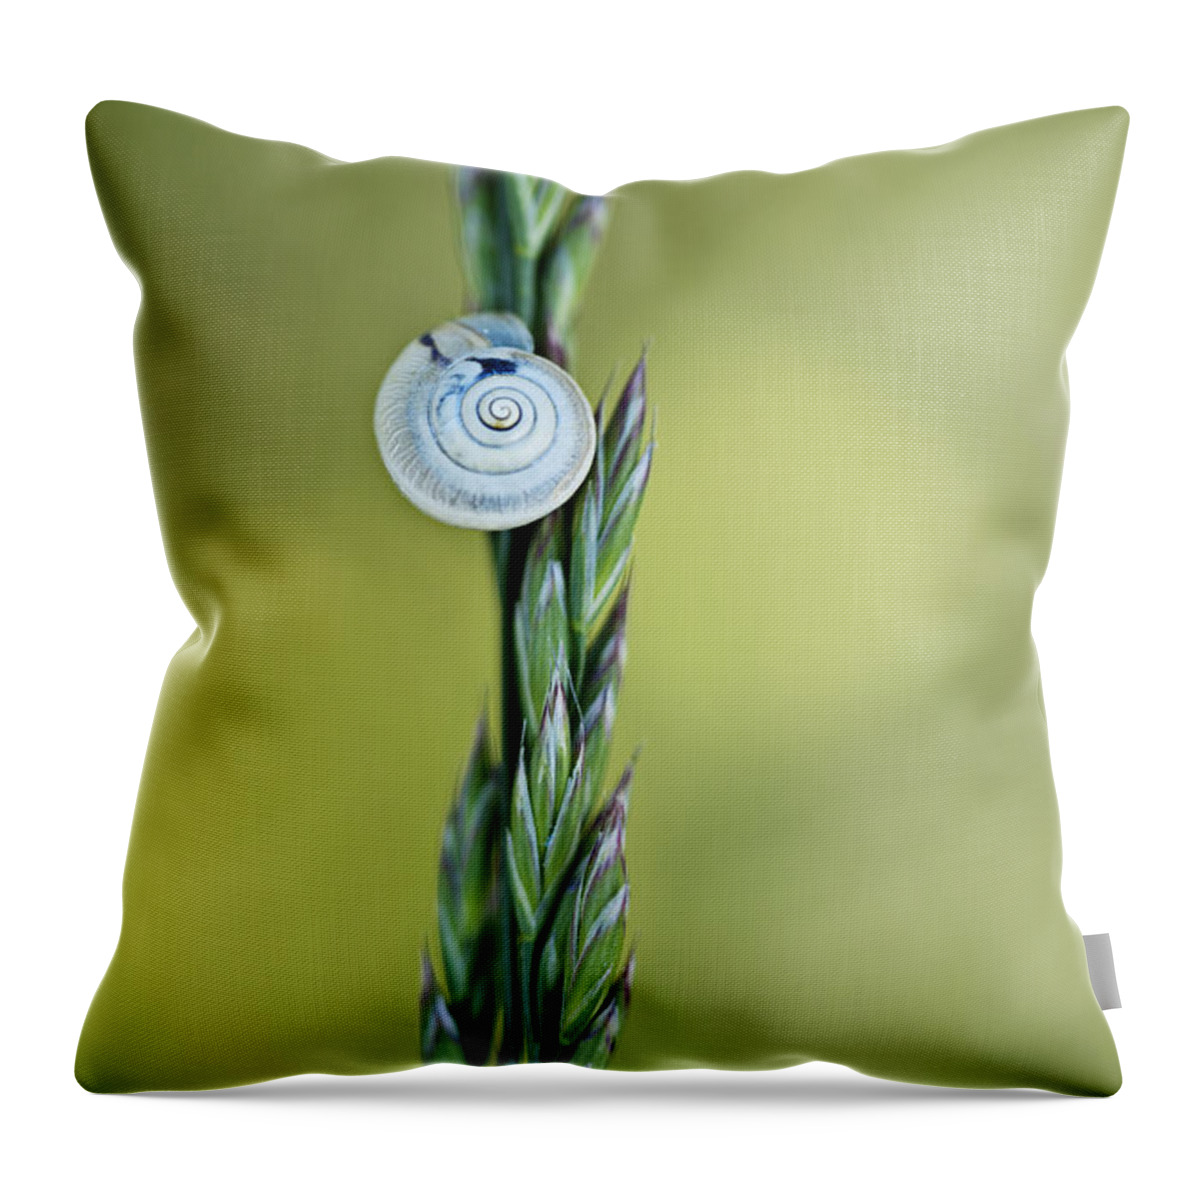 Snail Throw Pillow featuring the photograph Snail on Grass by Nailia Schwarz